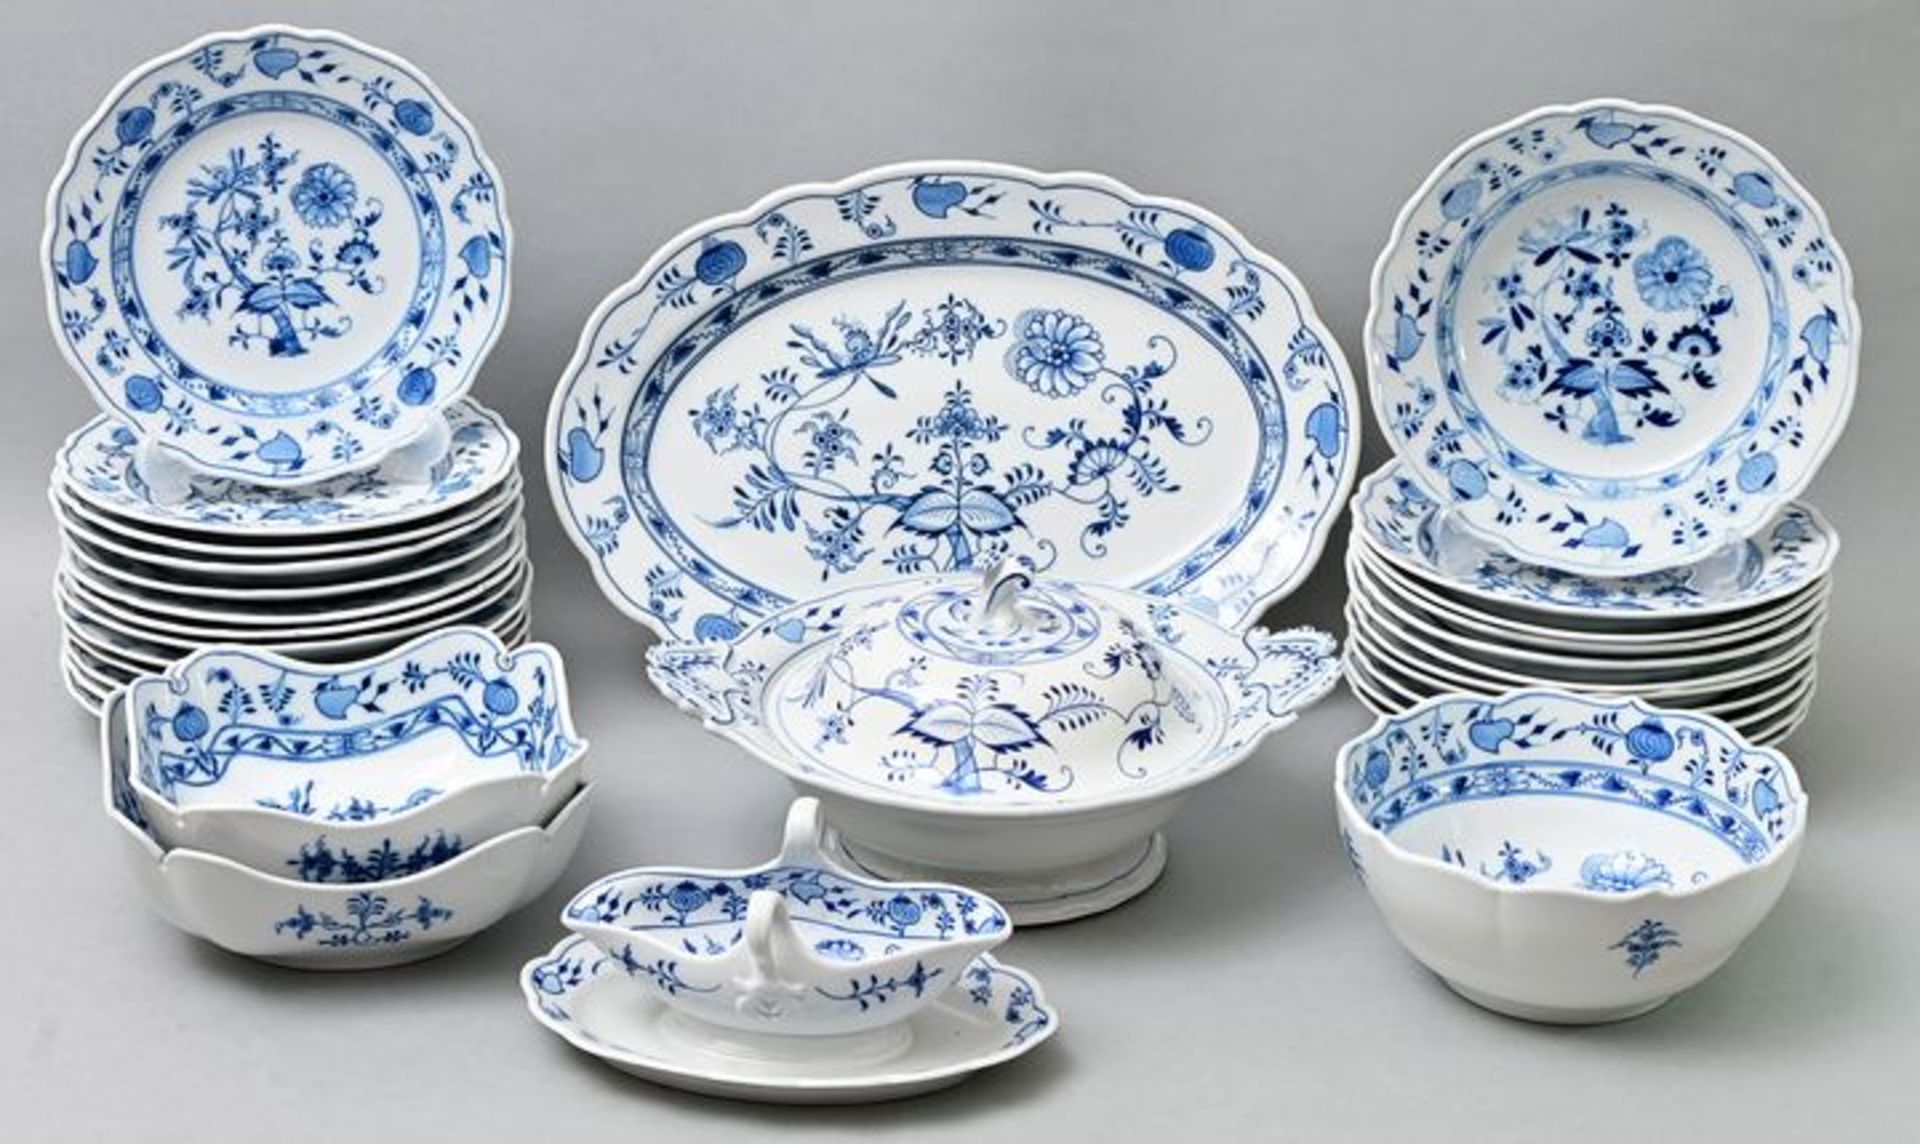 Speiseservice-Teile/ 37 items porcelain - Image 4 of 5